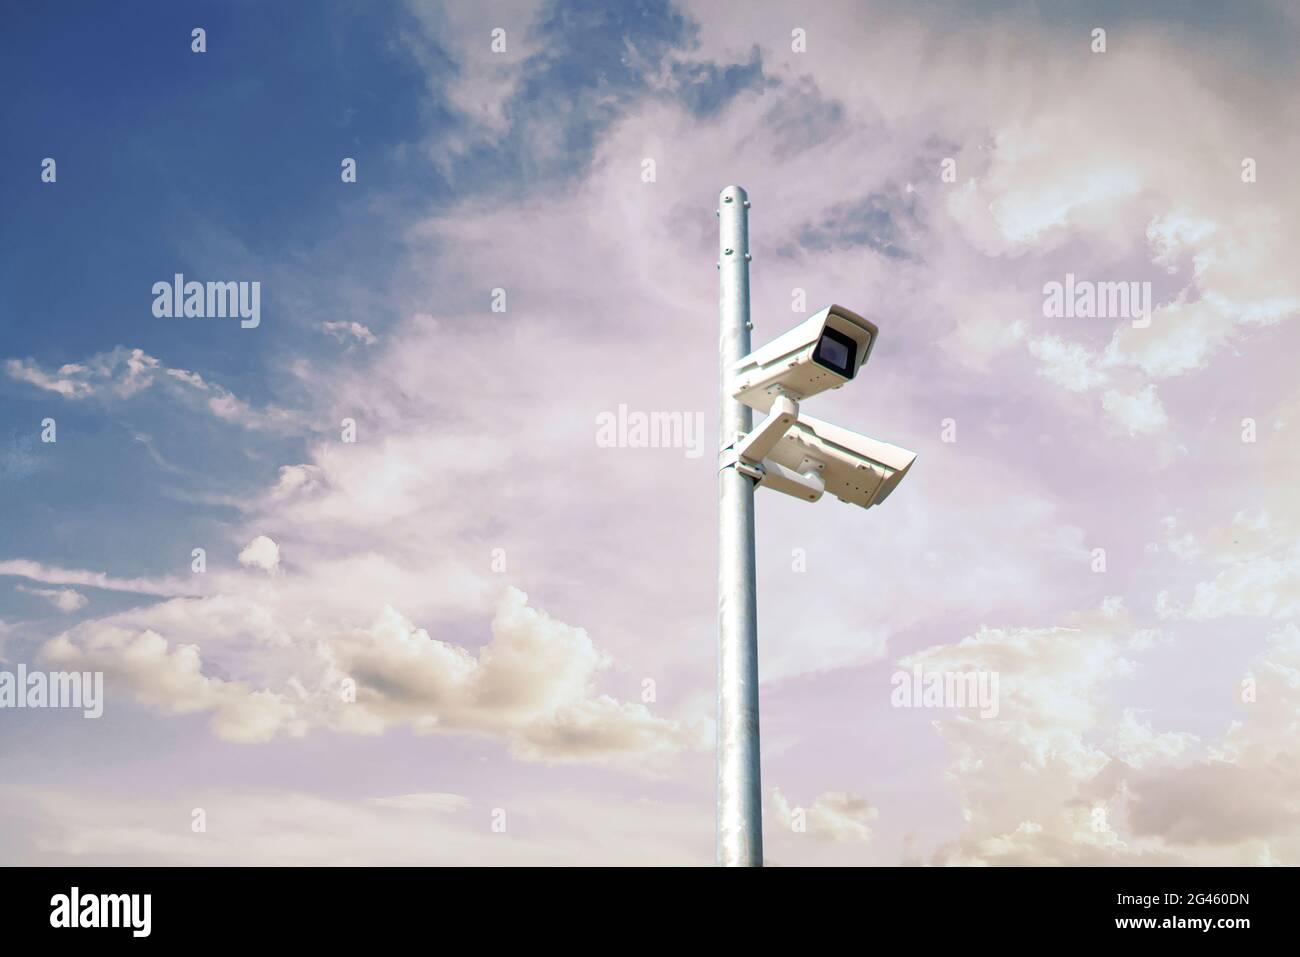 cctv camera in the city street, big brother and privacy concept Stock Photo